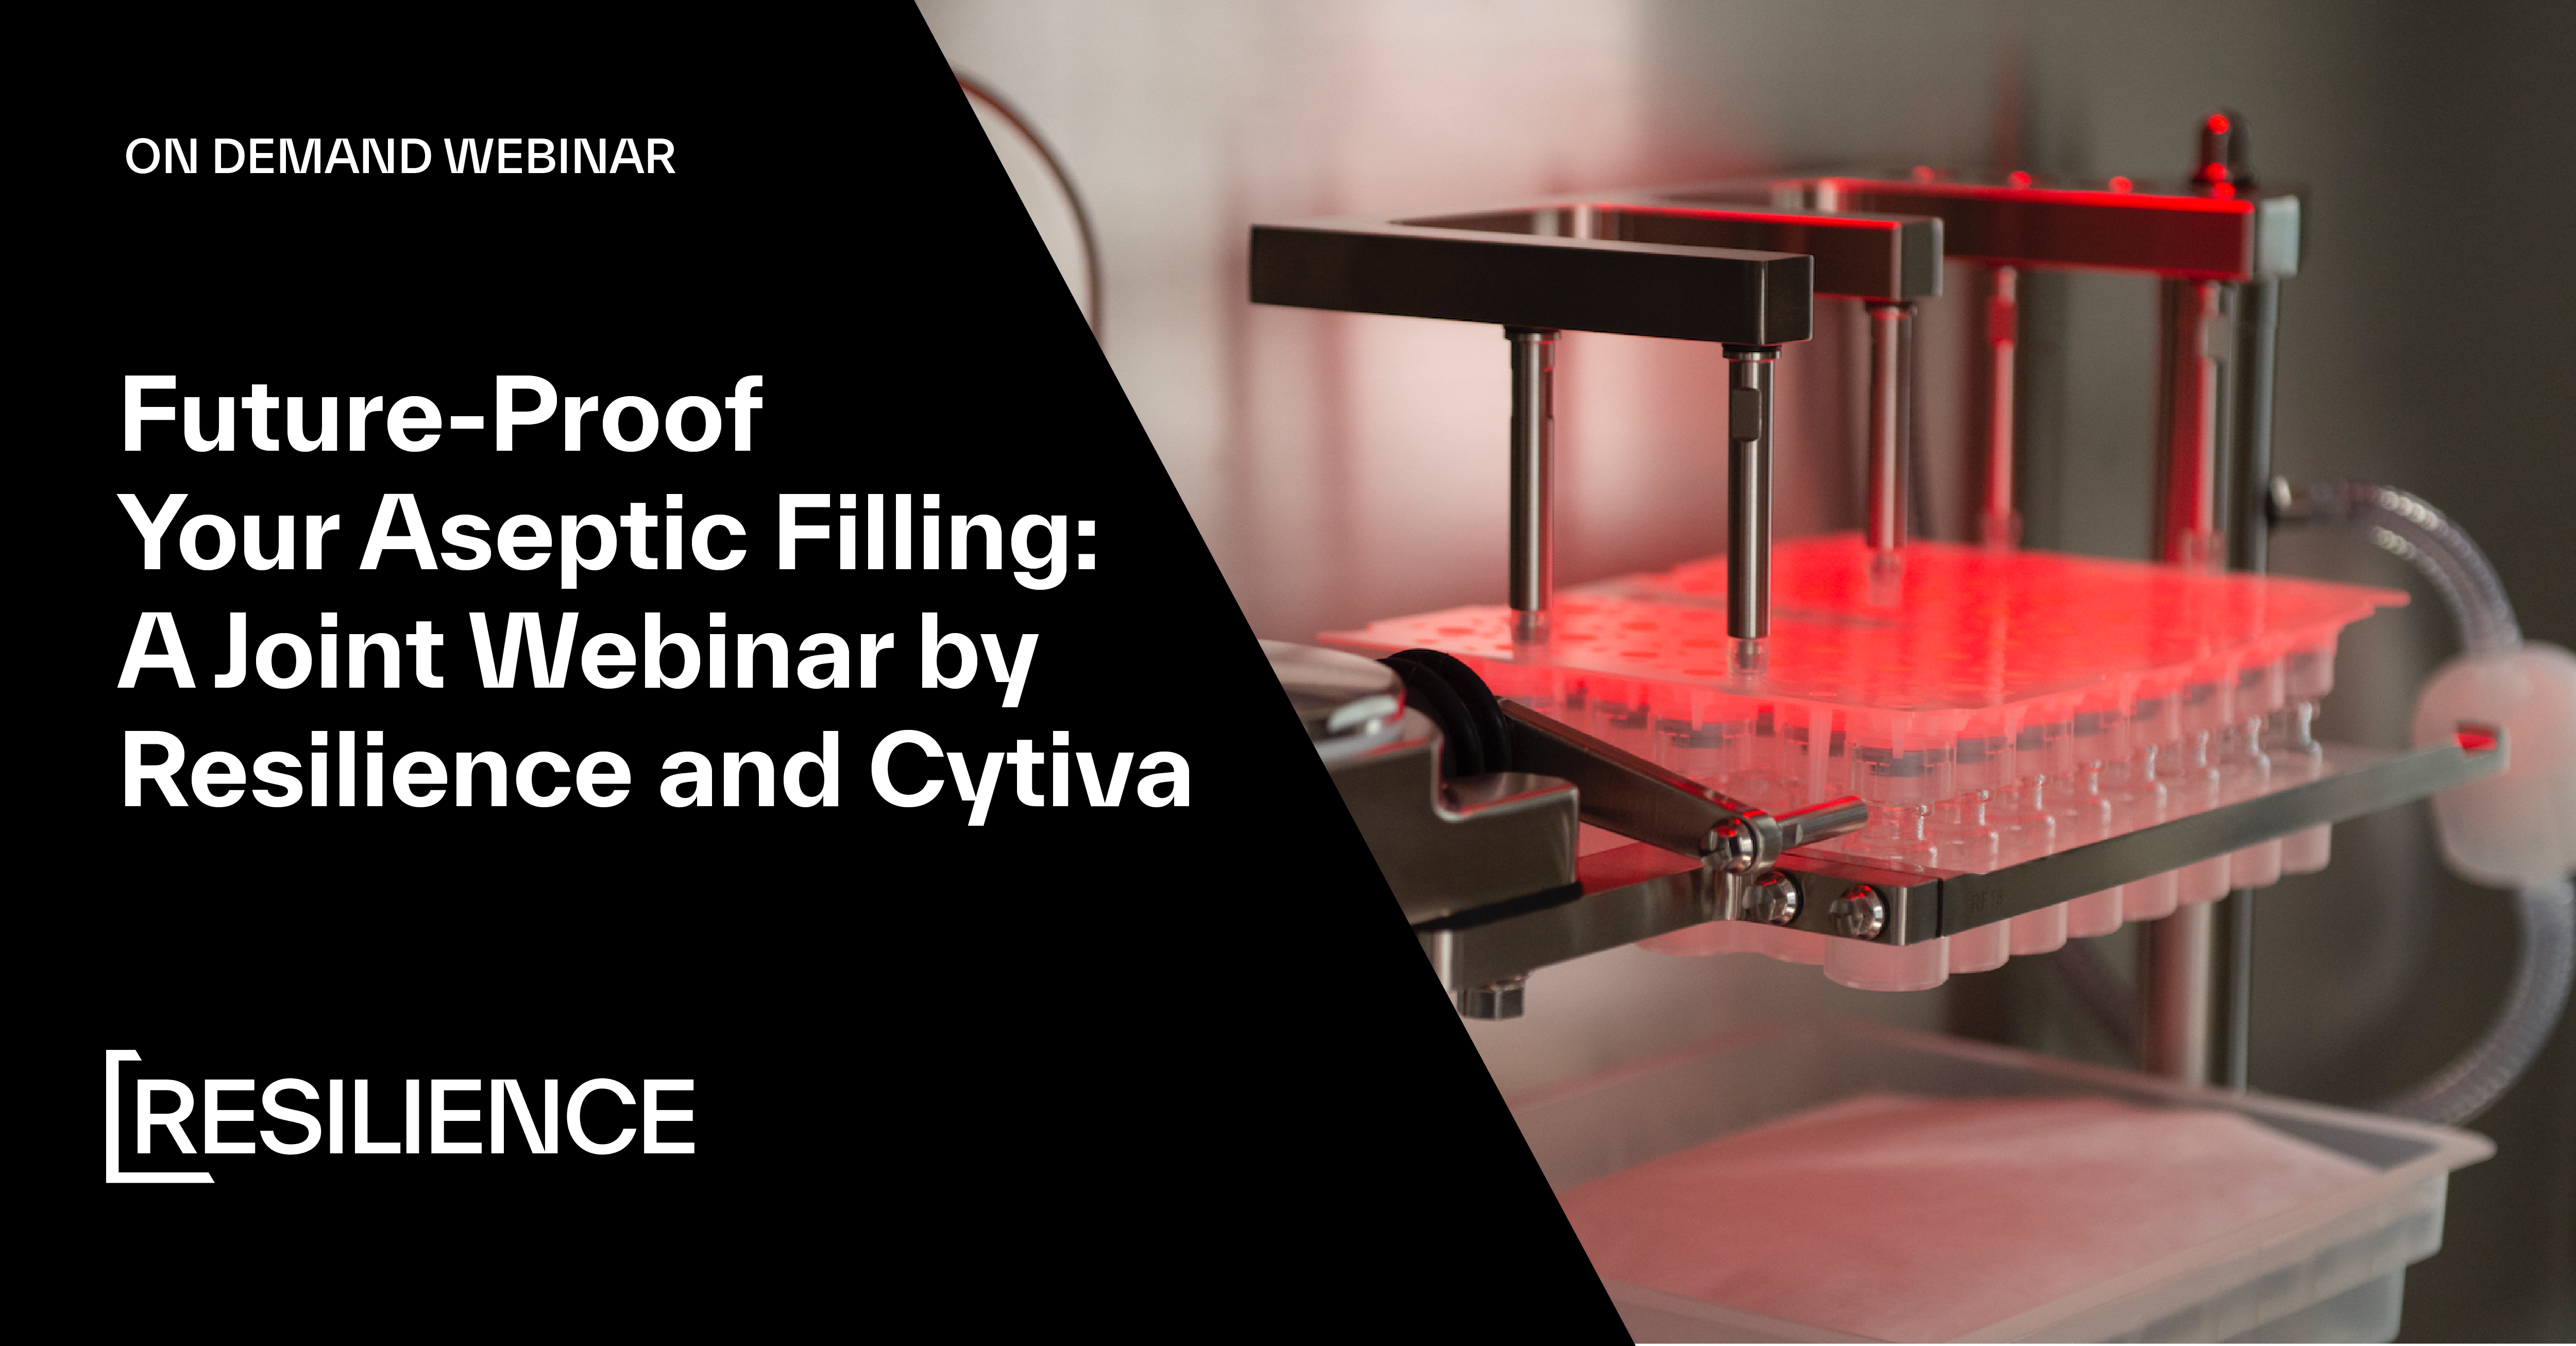 Future-Proof Your Aseptic Filling: A Joint Webinar by Resilience and Cytiva